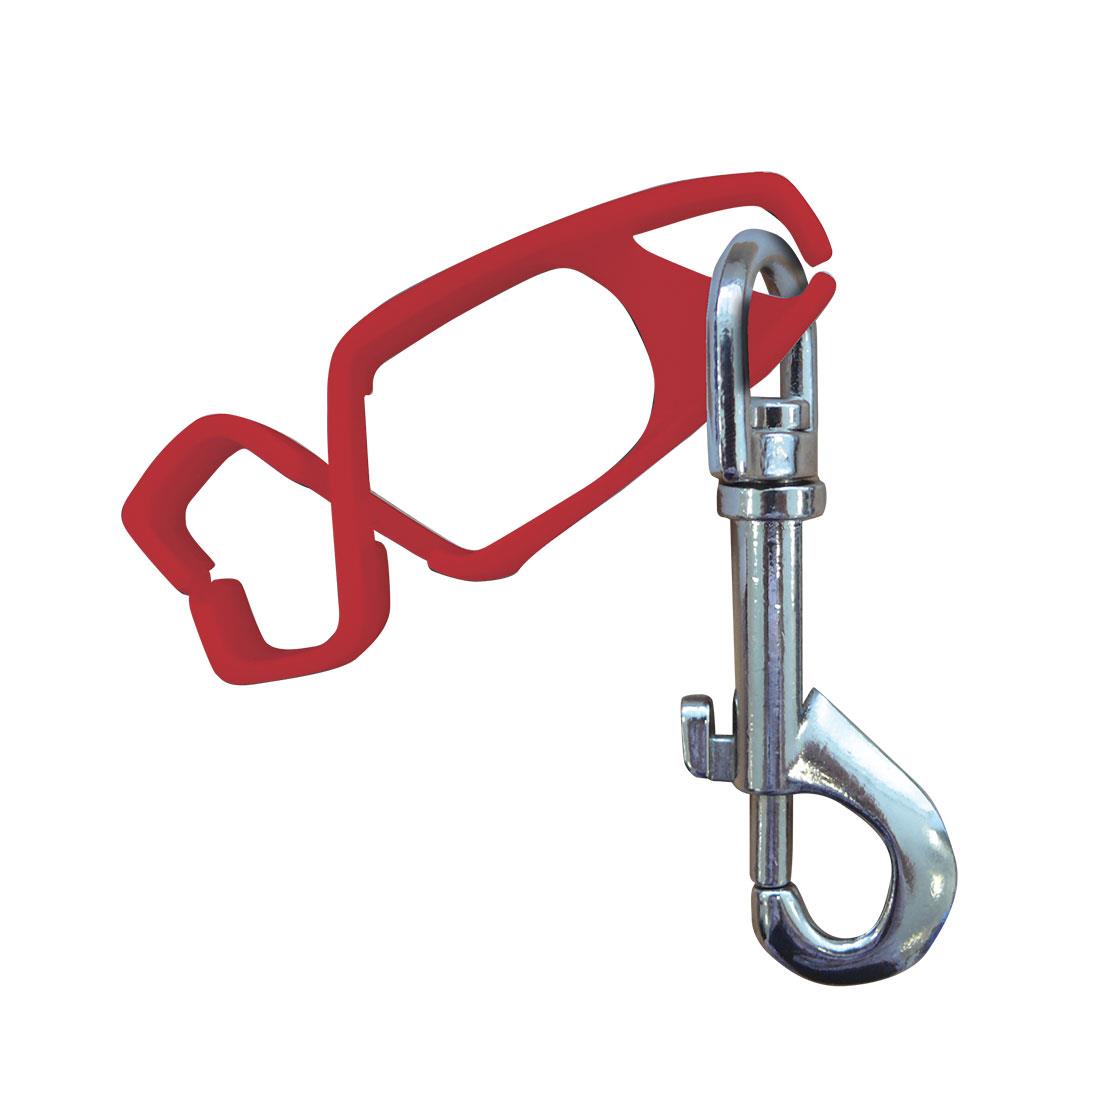 PORTWEST red plastic/metal glove and PPE holder clip #A001